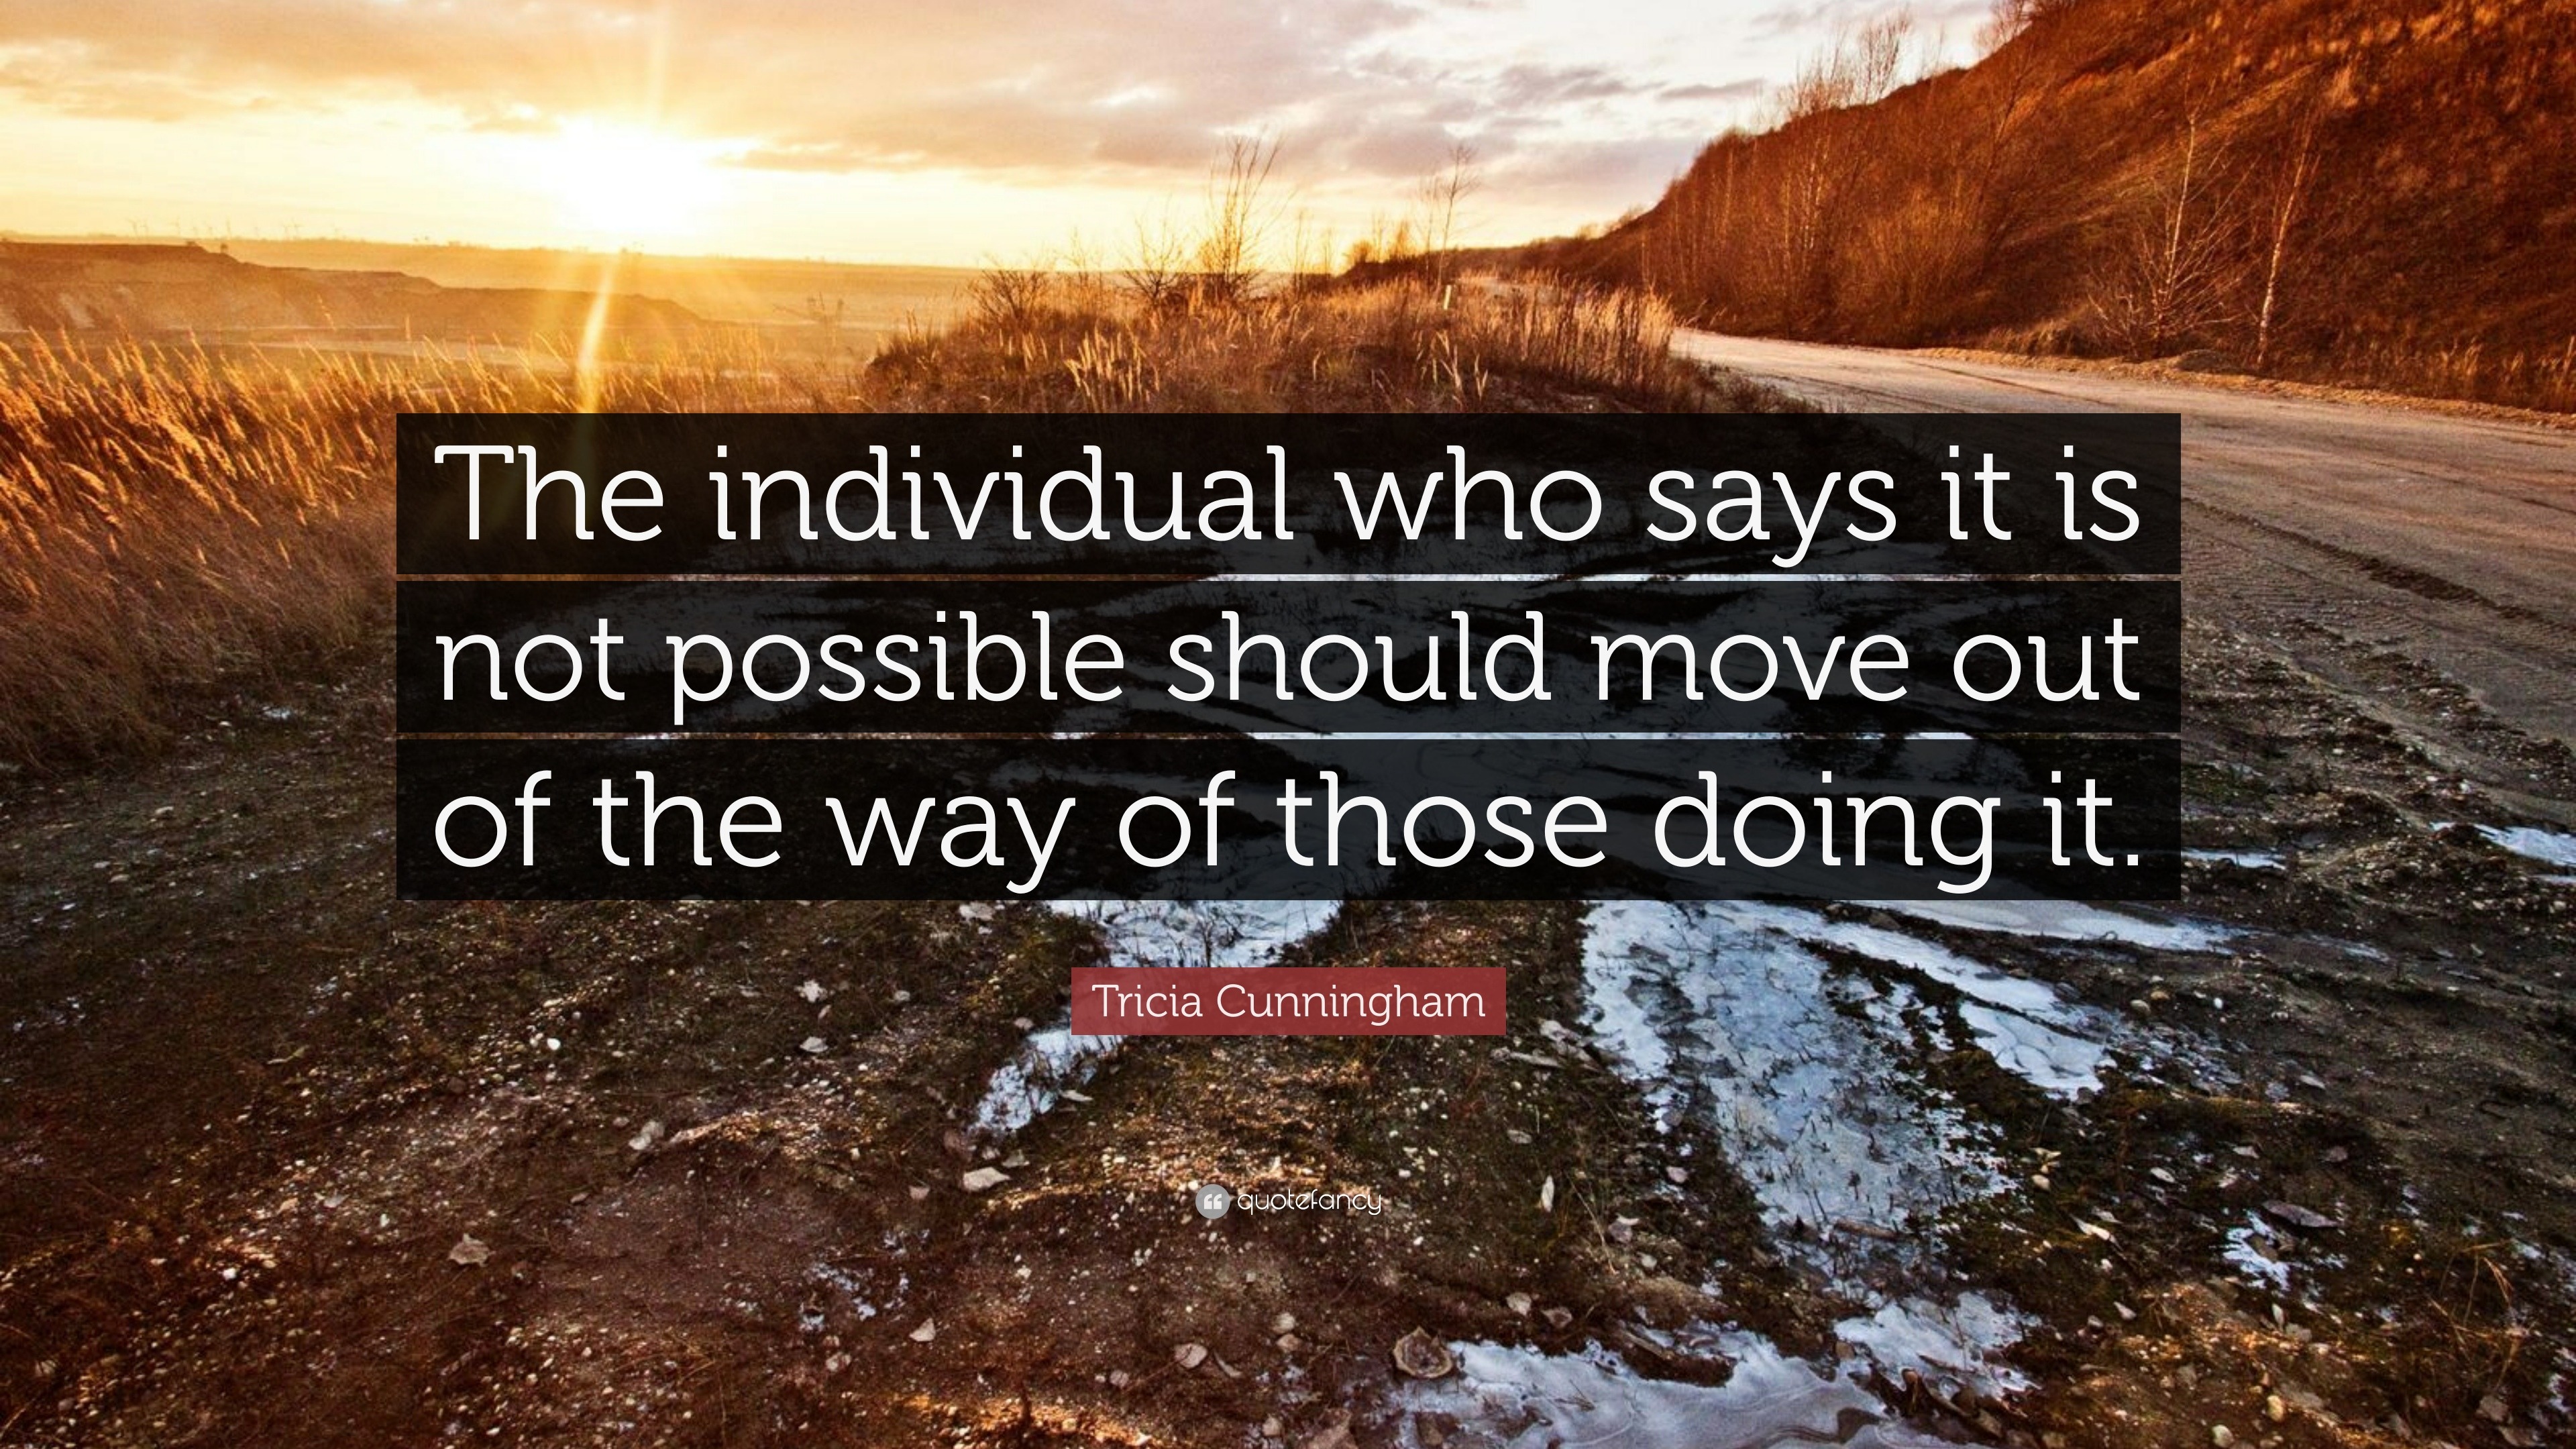 Tricia Cunningham Quote: “The individual who says it is not possible ...